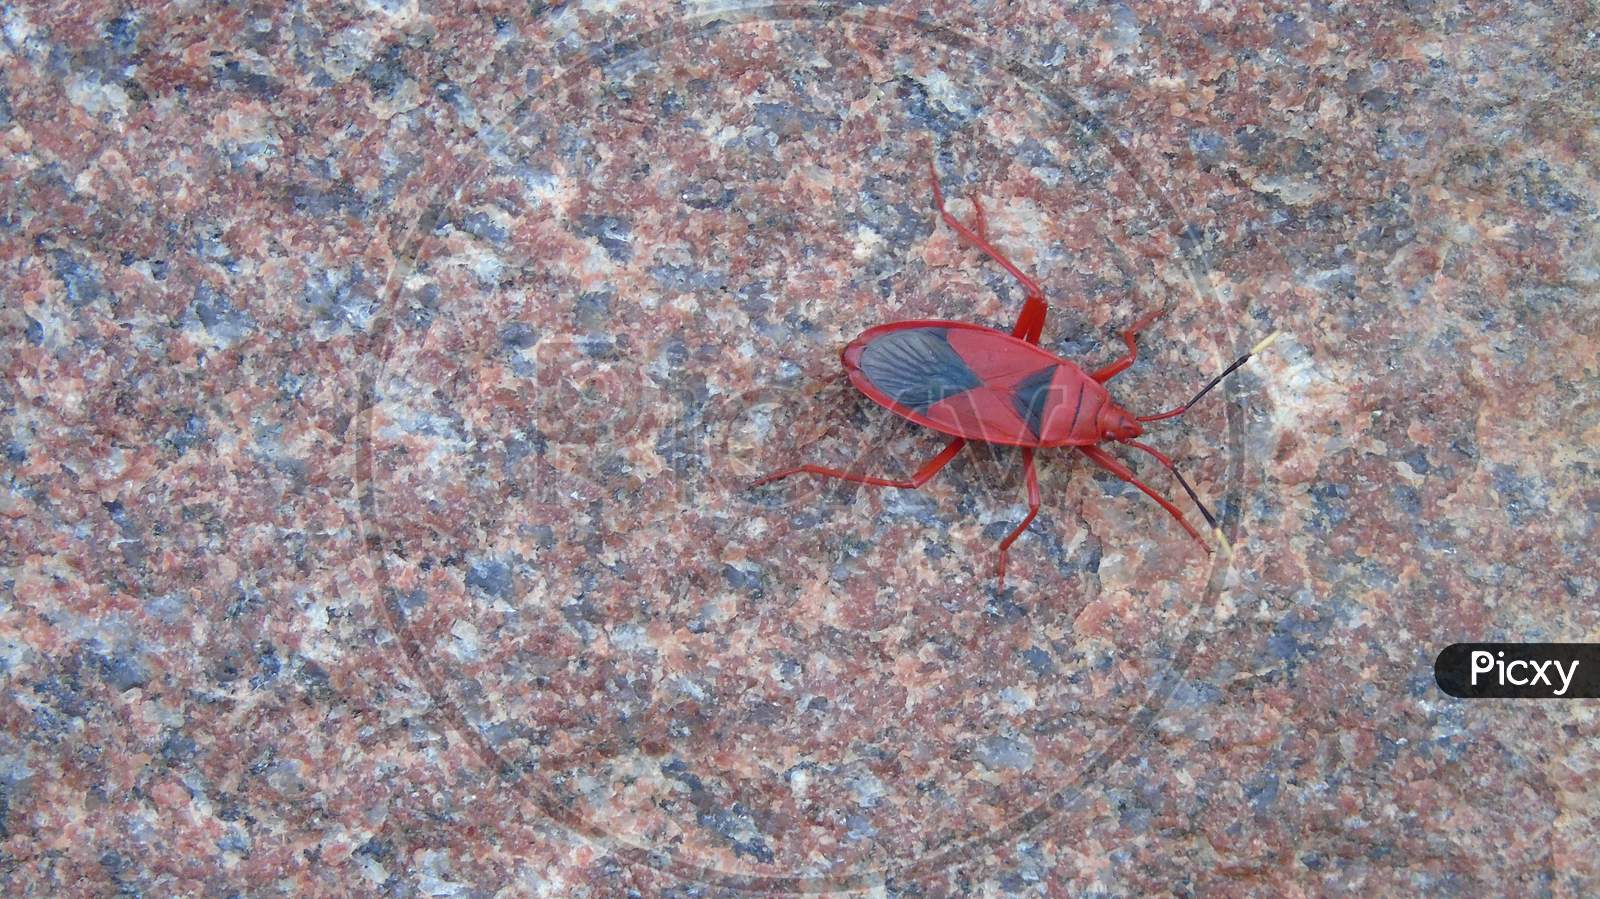 red insect on fencing stone